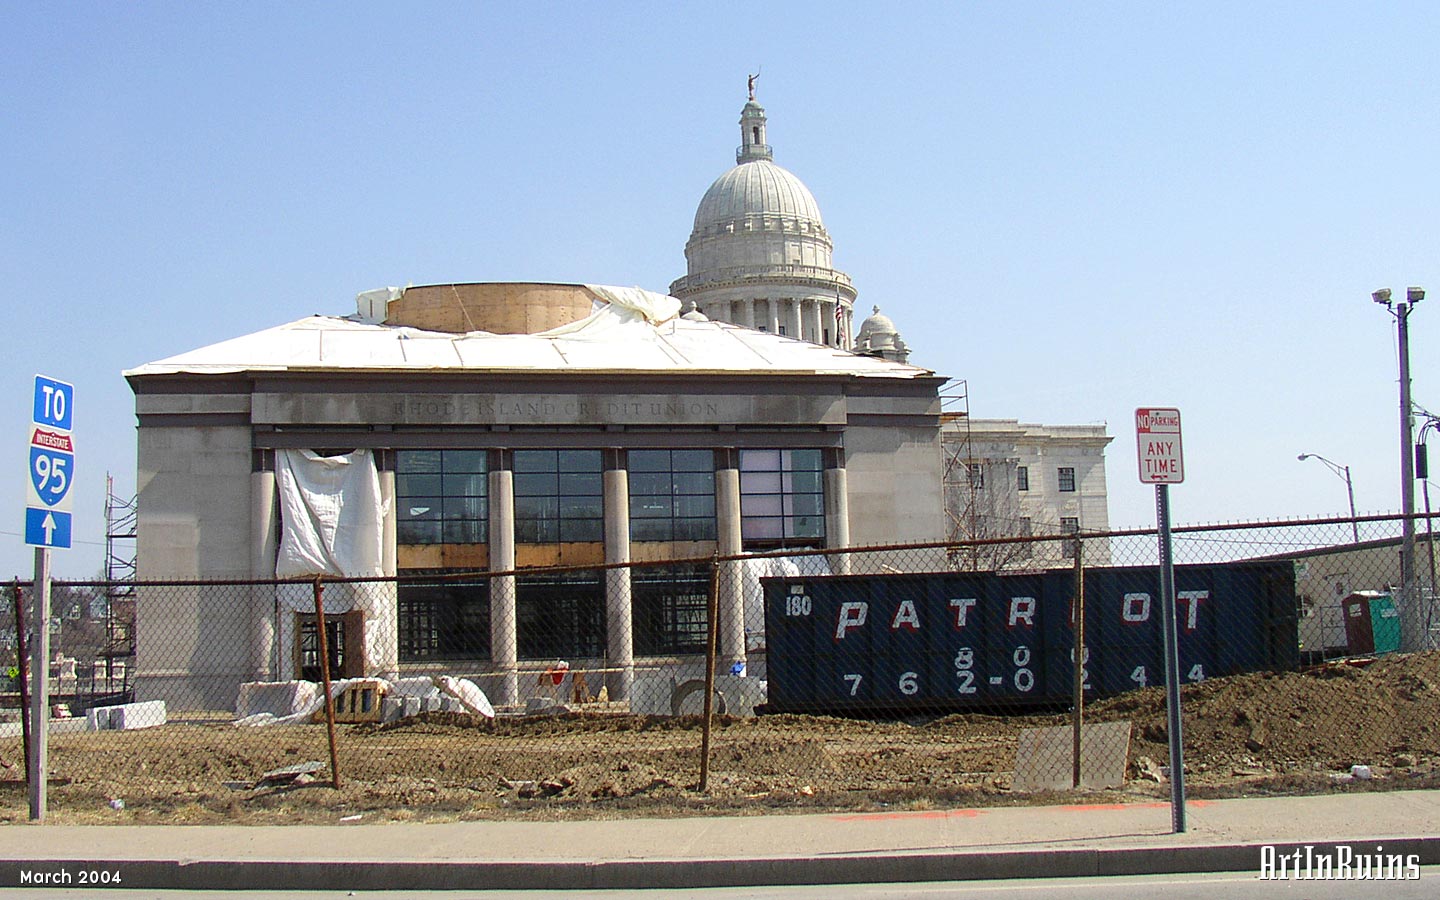 A one-story grey stone clad building with a high ceiling and central dome-like detail. Modern commercial glass panels are interspersed between classical Greek-inspired columns on two sides of the building.